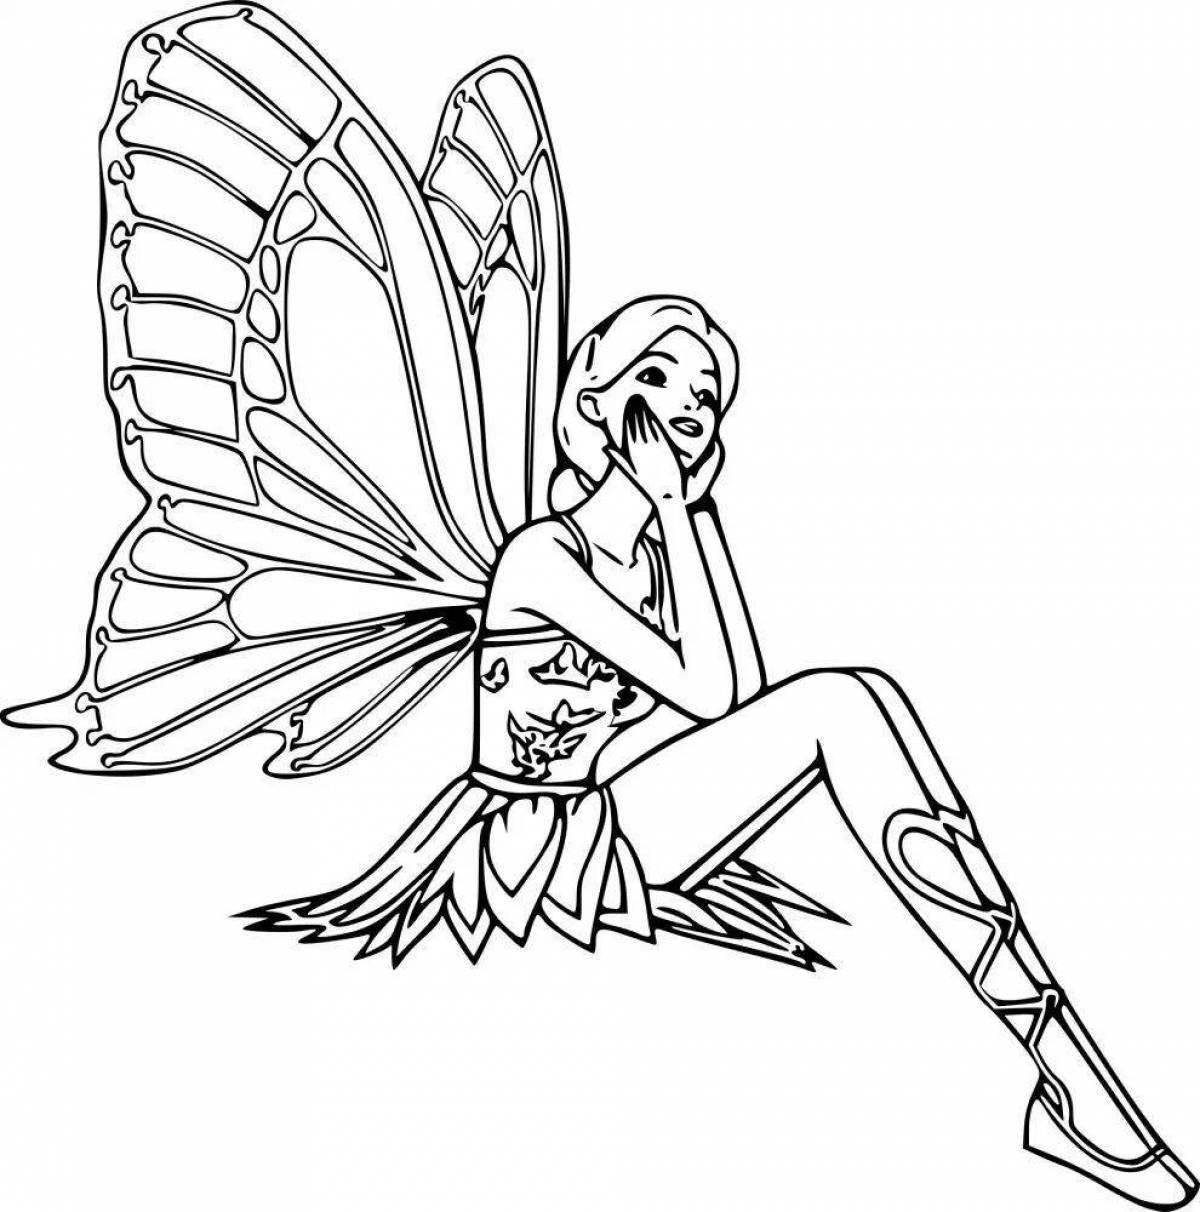 Colorful fairy barbie coloring page